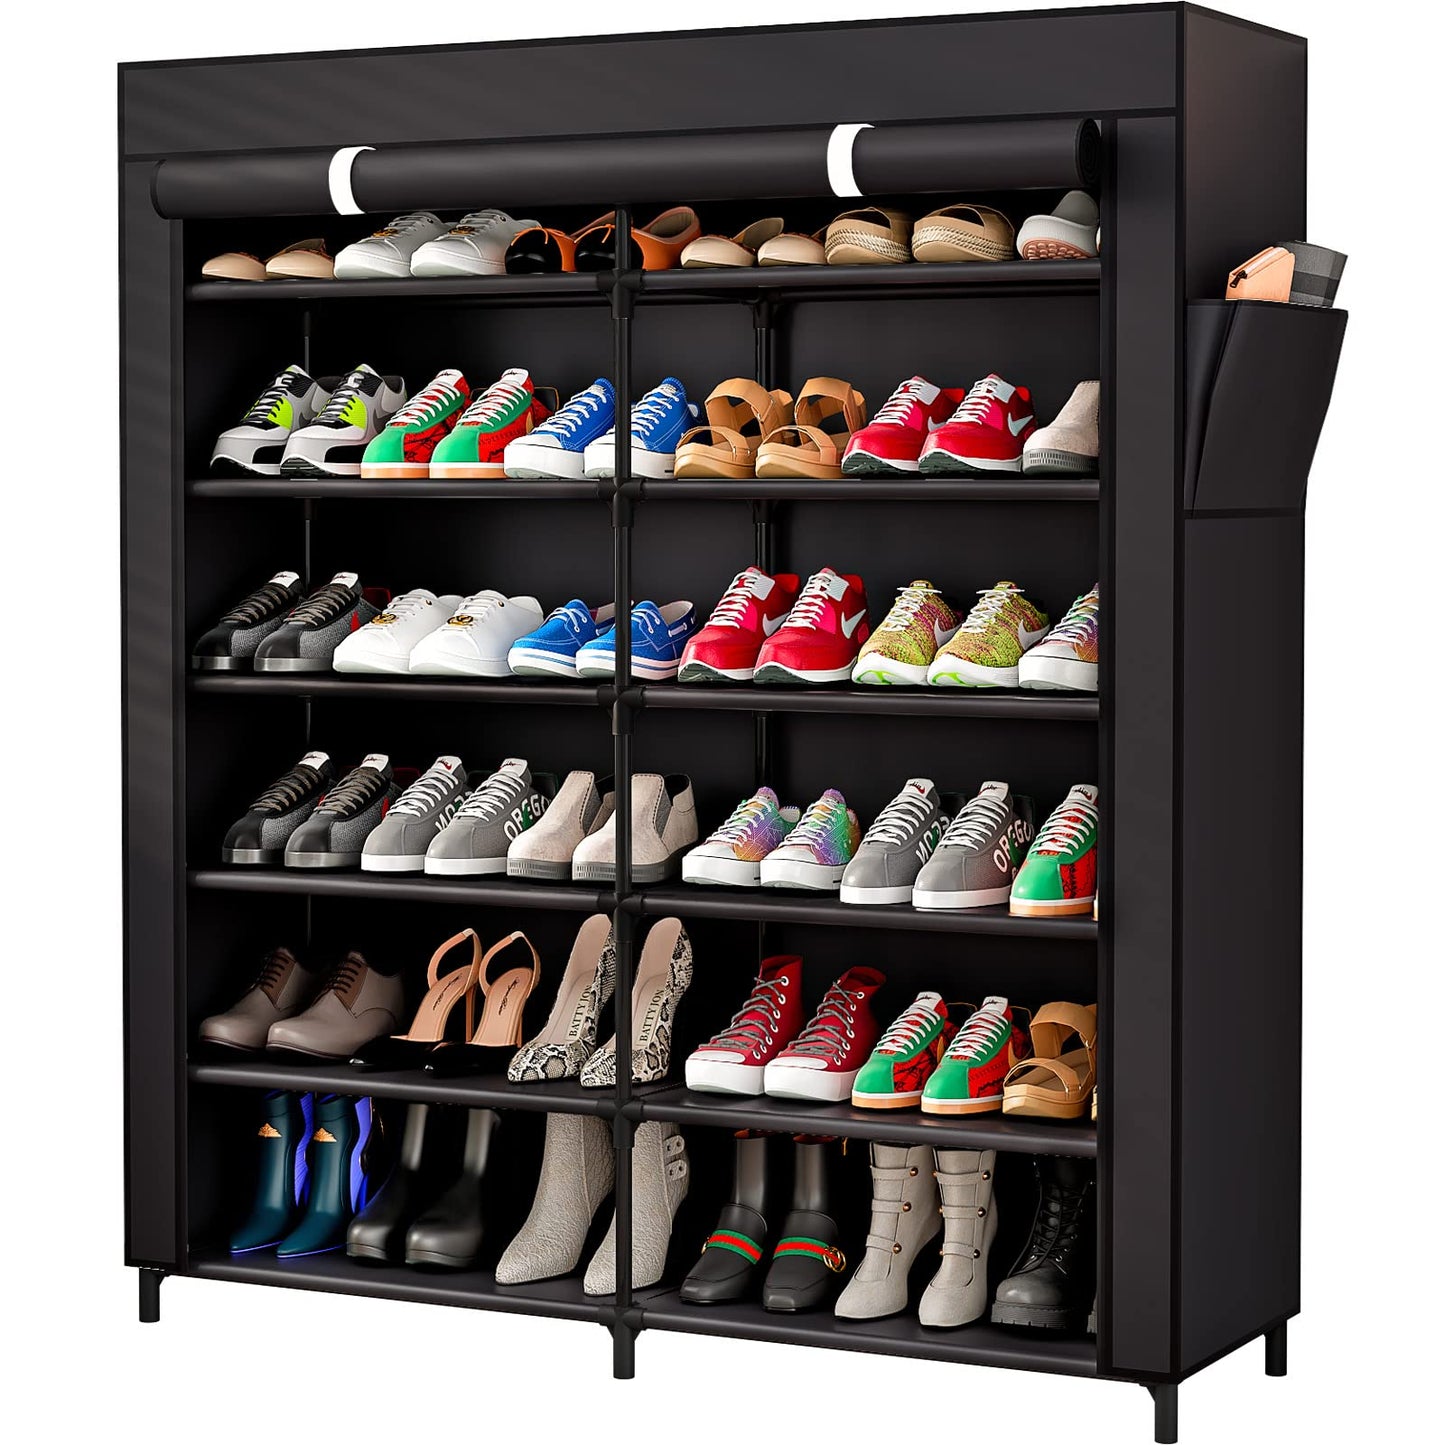 Linzinar 7-Tier Shoe Rack Storage Organizer 42 Pairs Portable Double Row with Dustproof Cover Non-Woven Shoe Storage Cabinet